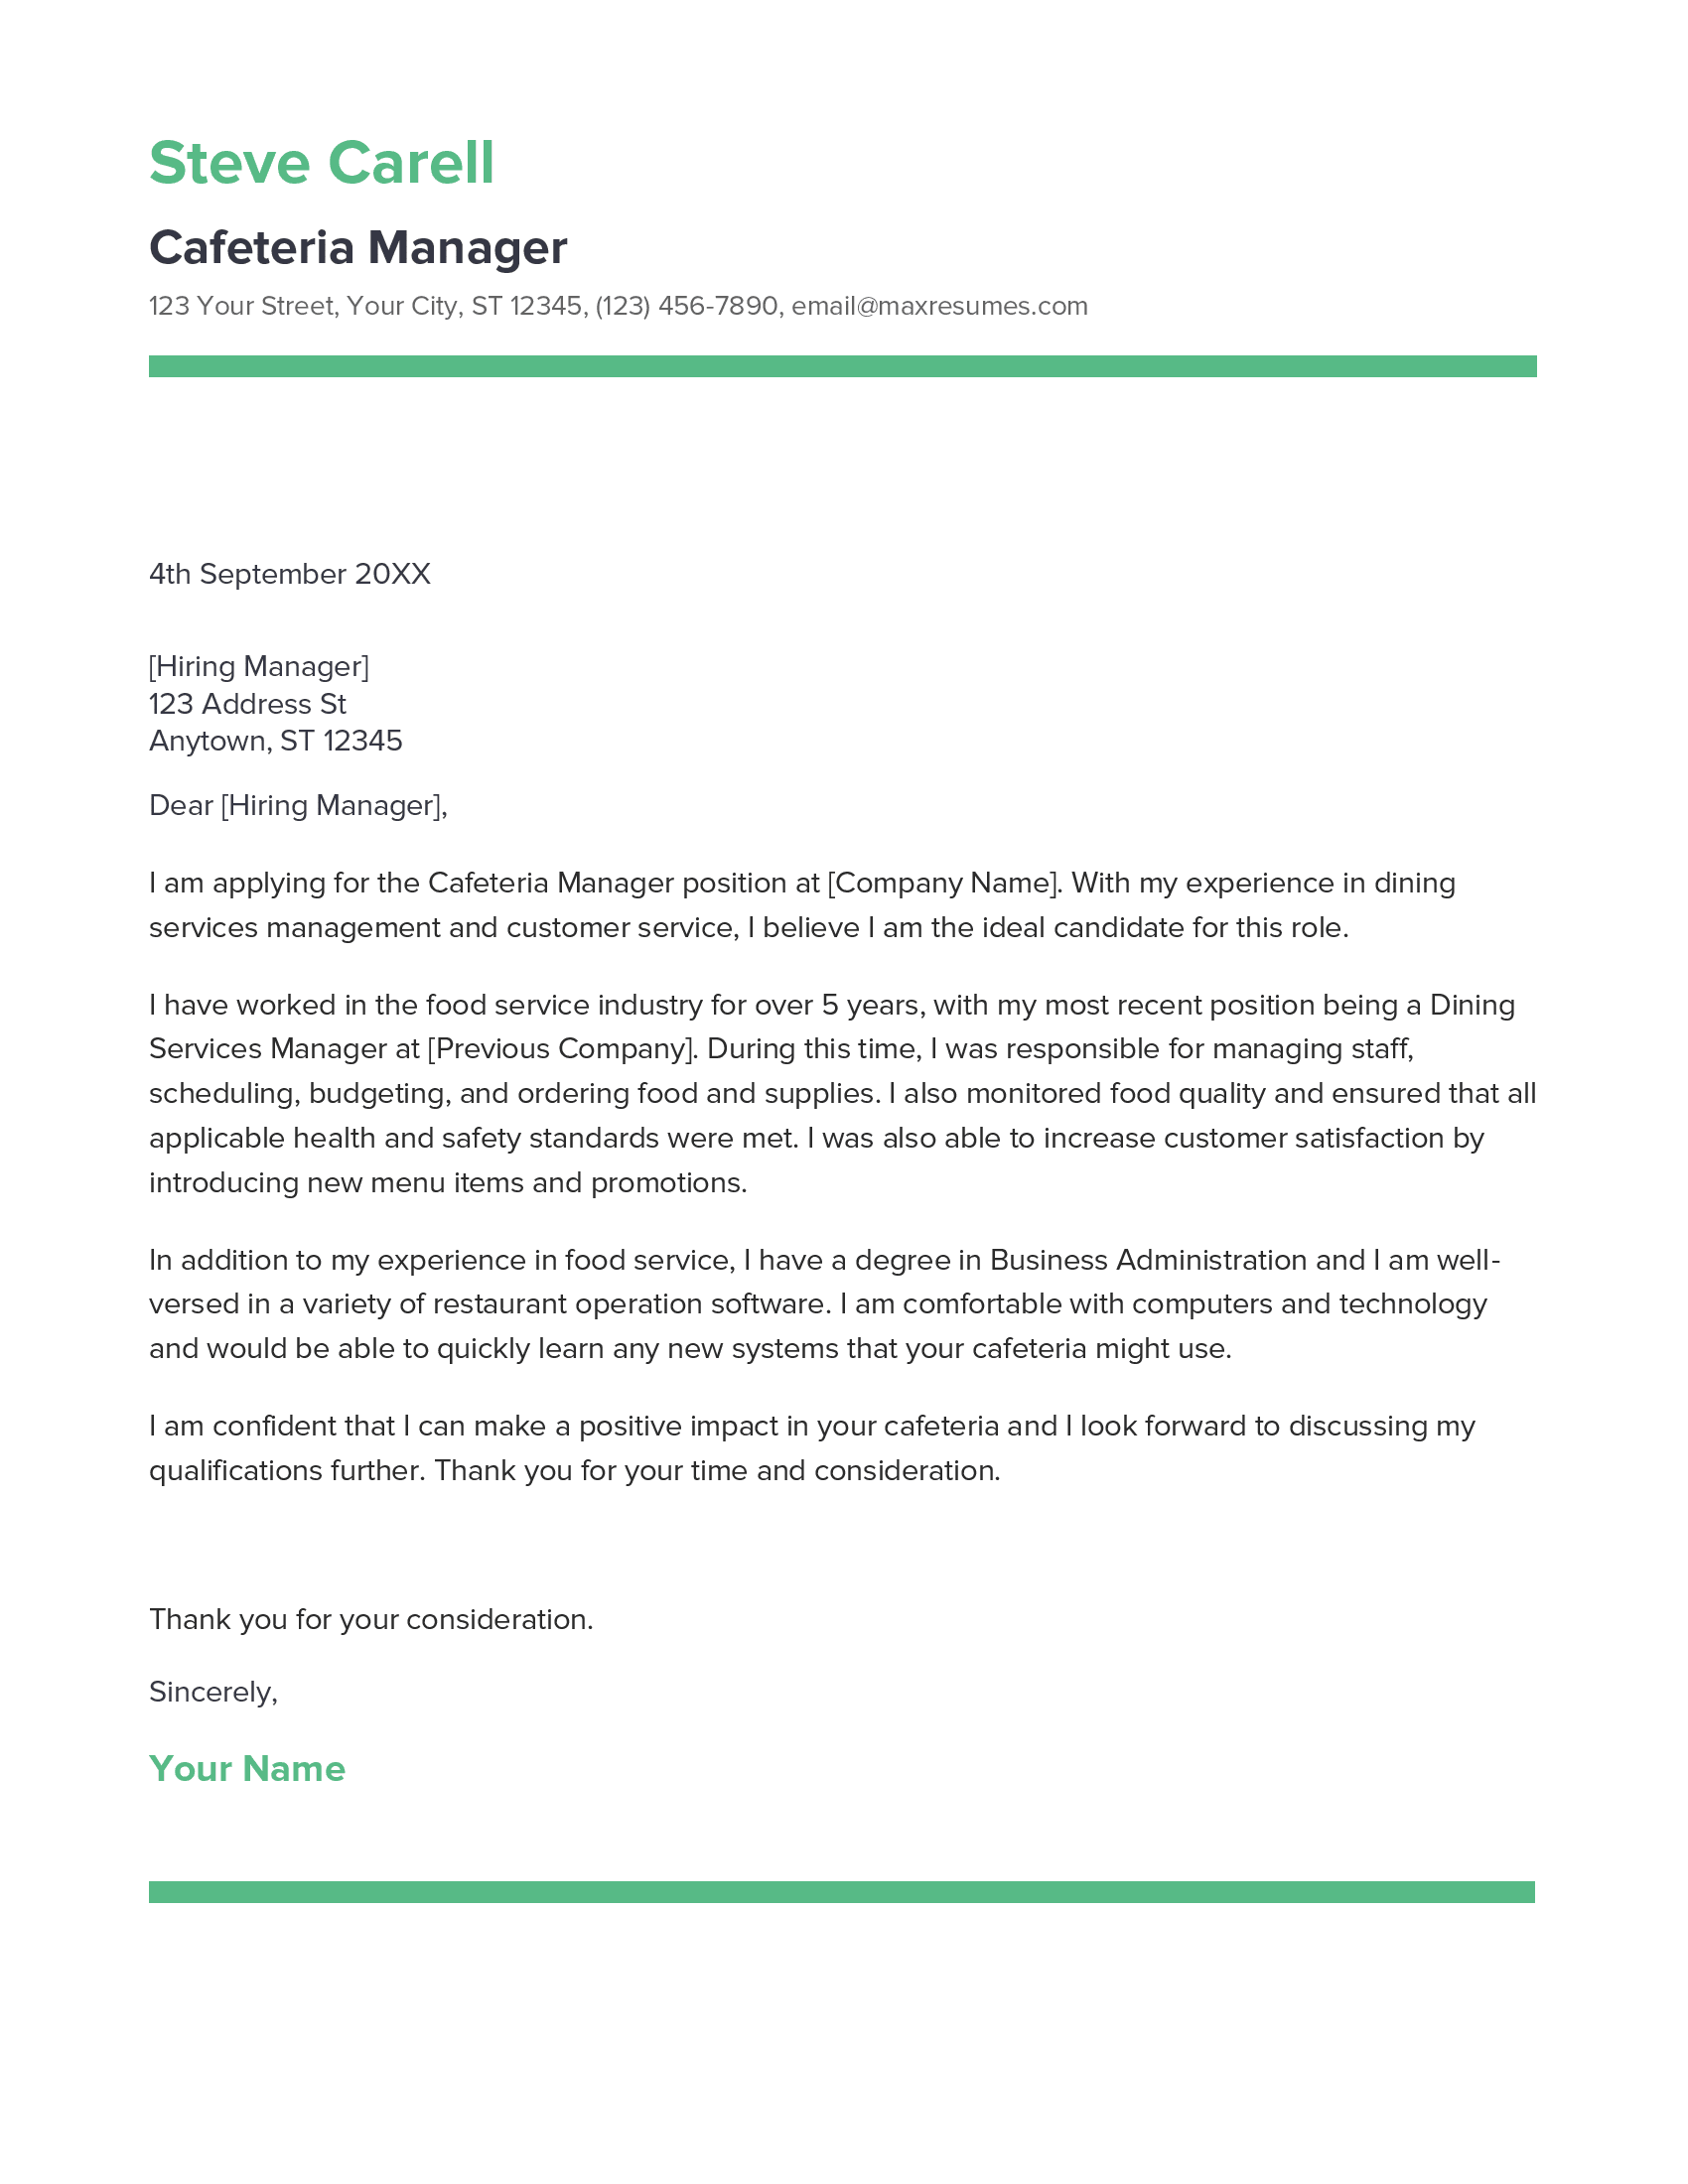 Cafeteria Manager Cover Letter Example